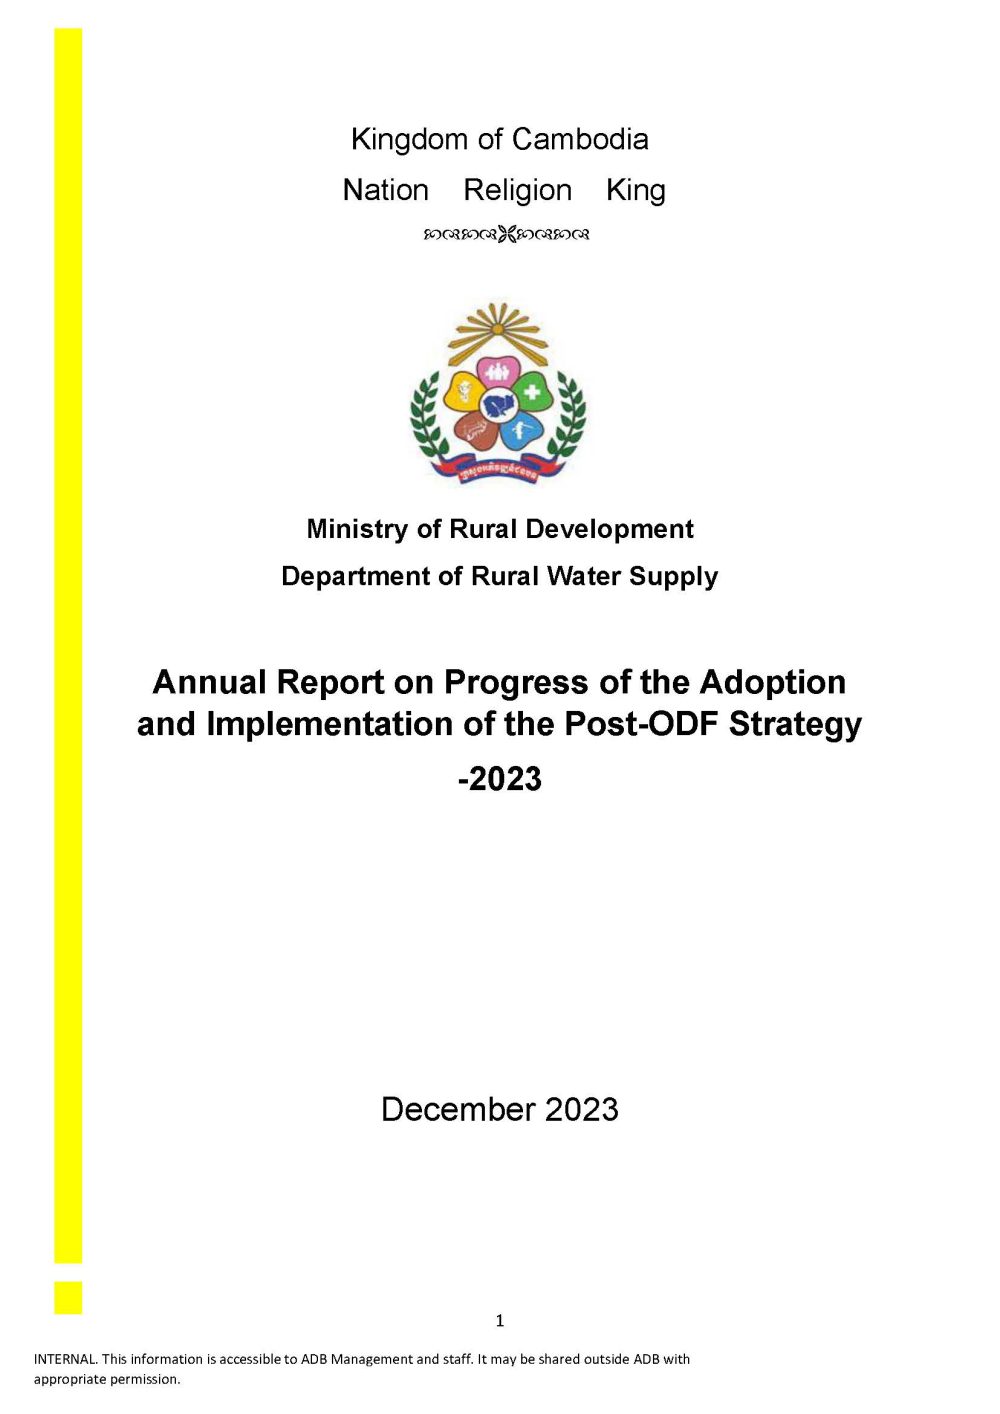 Pages from Annual report on progress of implementation of Post ODF Strategy